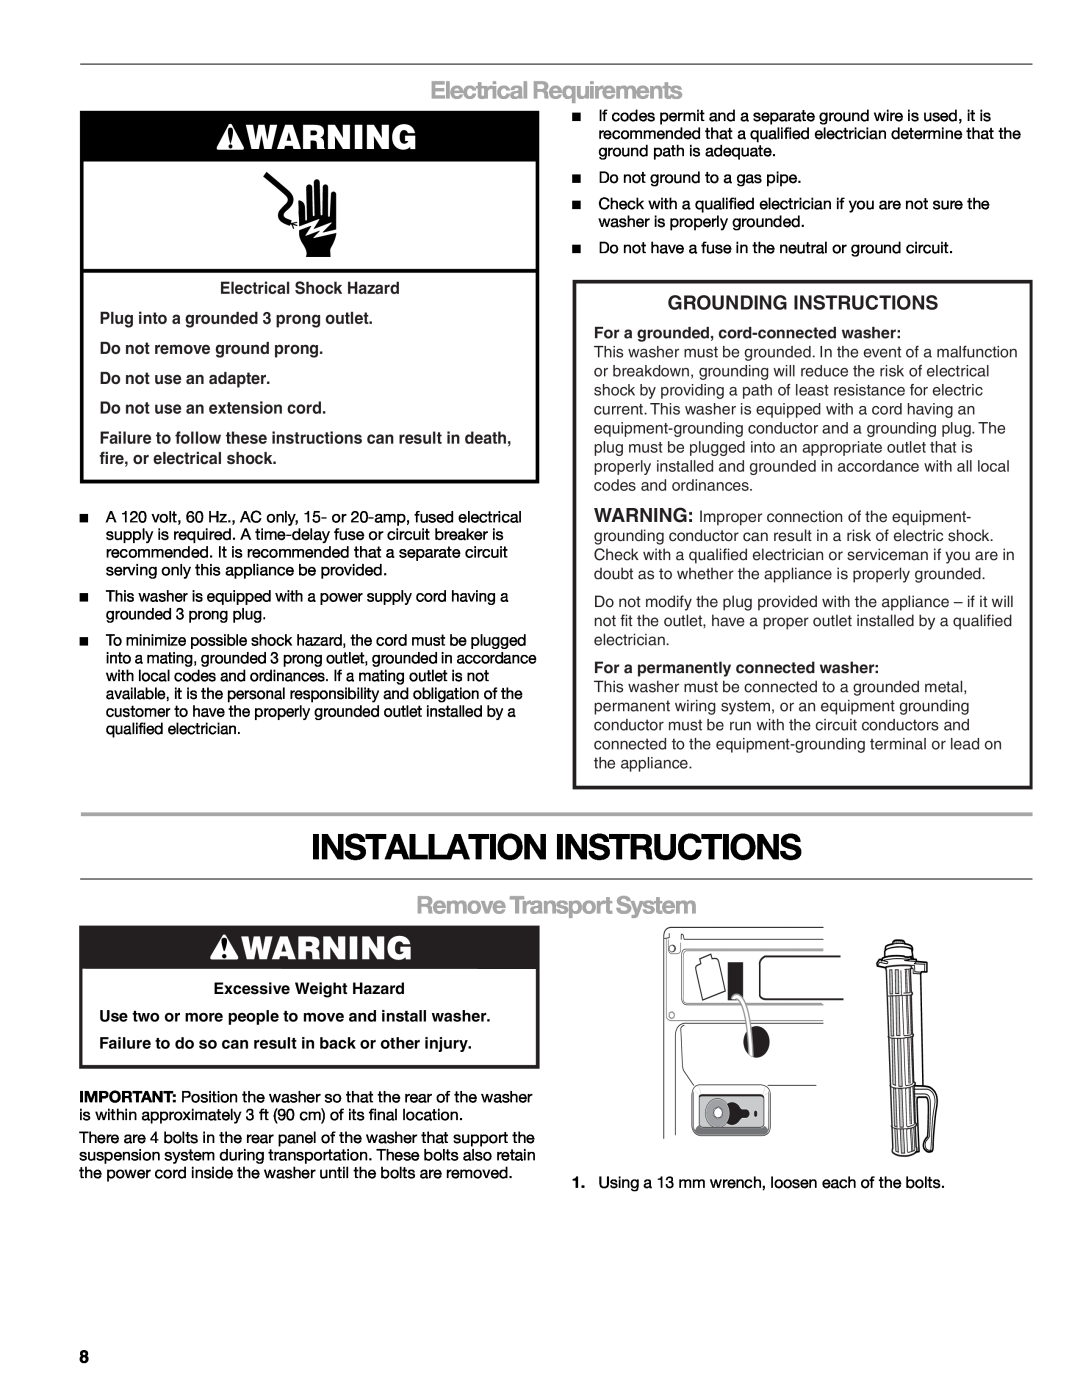 Sears 110.4779* manual Installation Instructions, Electrical Requirements, Remove Transport System, Grounding Instructions 